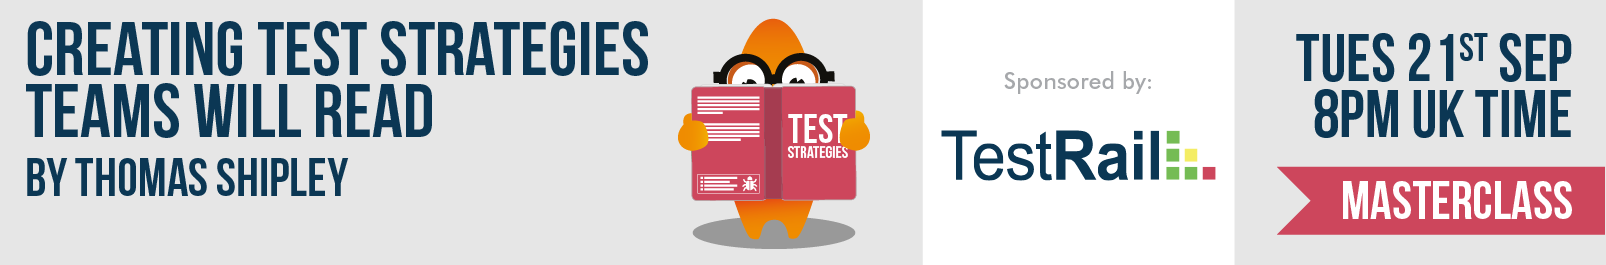 Creating Test Strategies Teams Will Read banner image